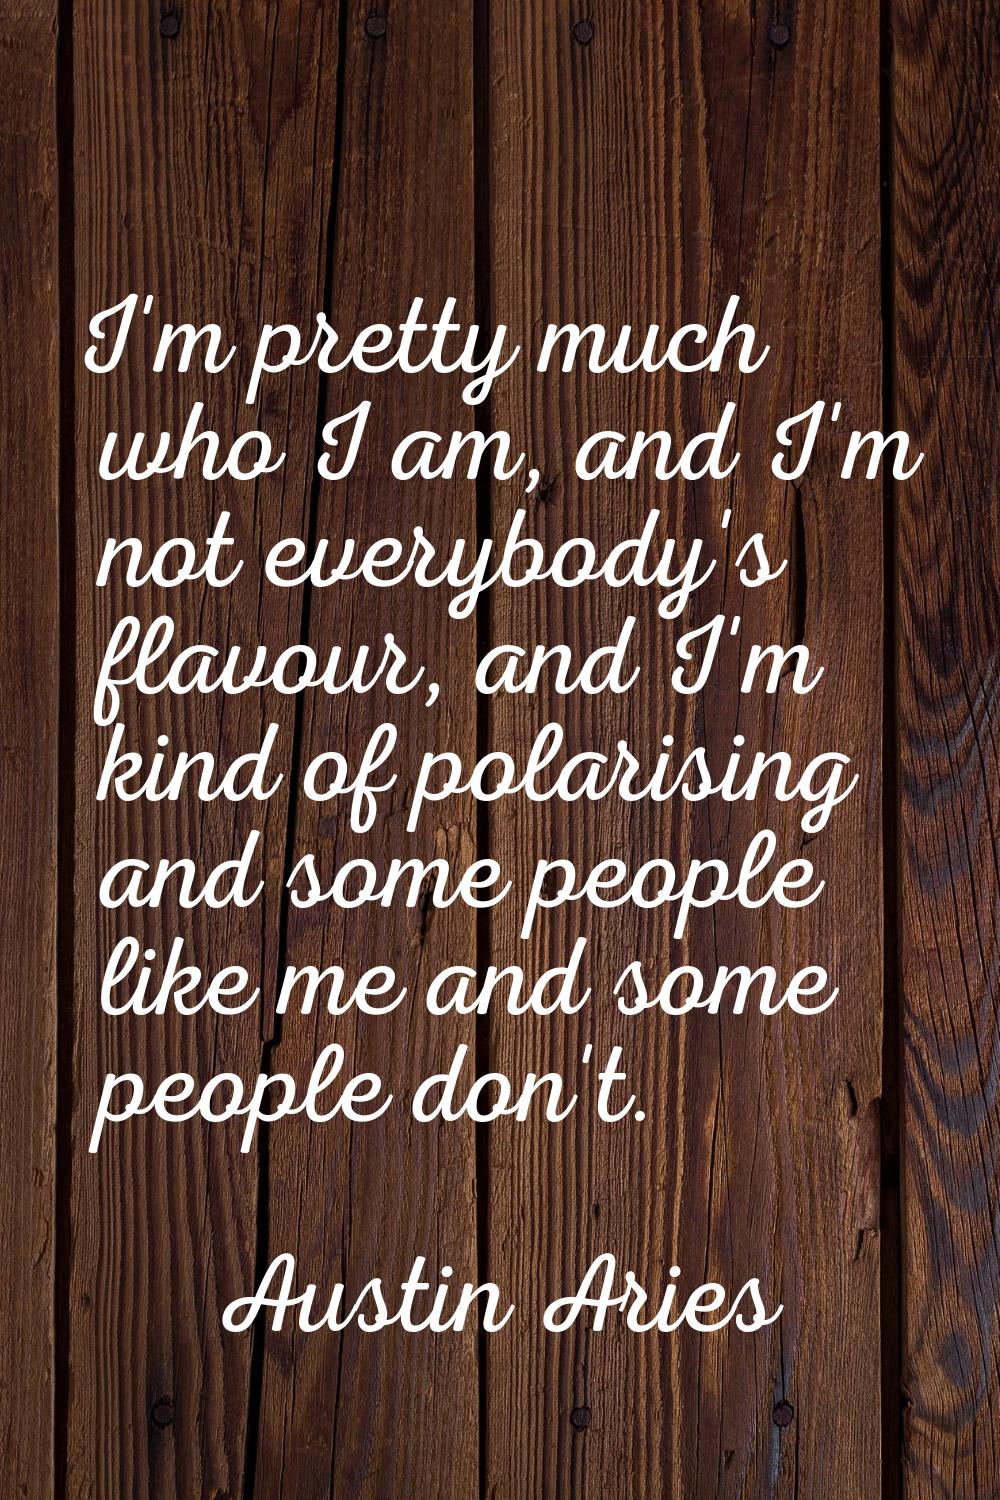 I'm pretty much who I am, and I'm not everybody's flavour, and I'm kind of polarising and some peop